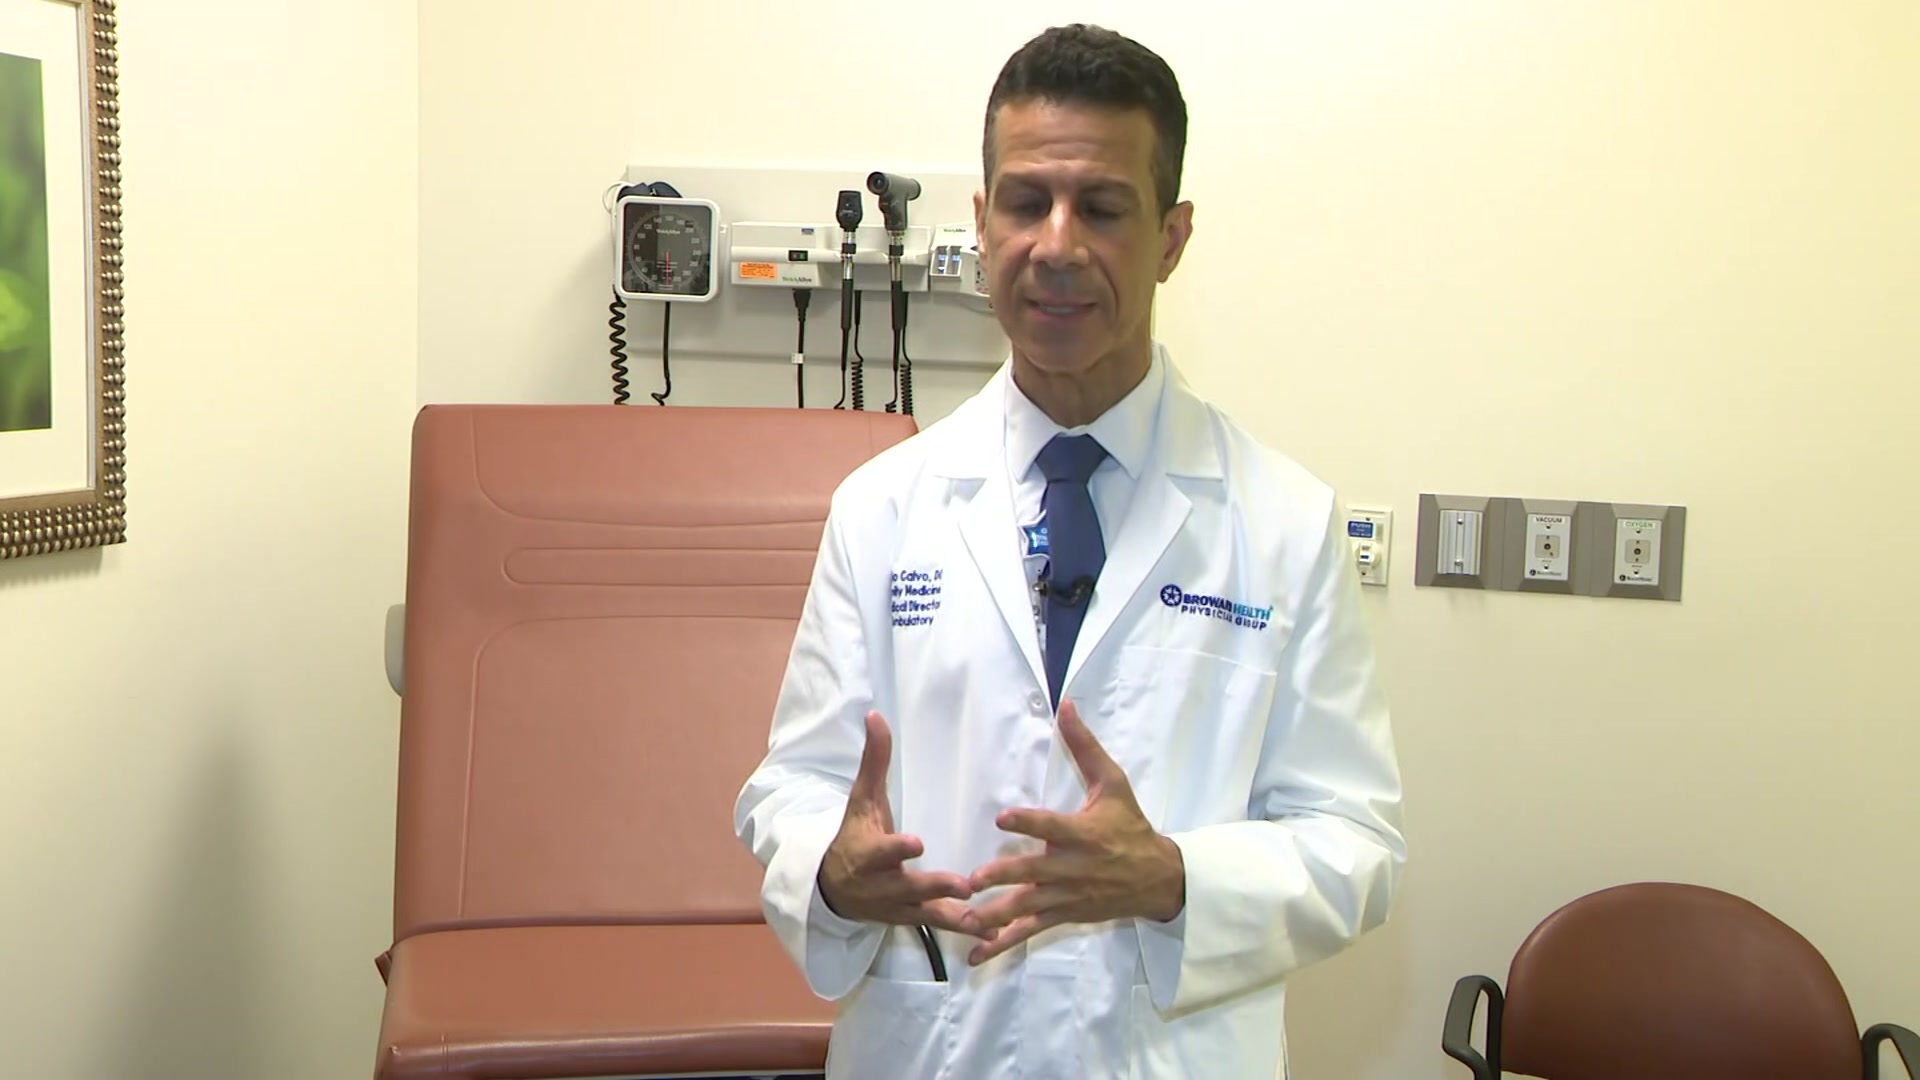 Hispanic Heritage Month: For Broward Health’s Dr. Aldo Calvo Treating, Bonding With Patients Is A Matter Of Pride